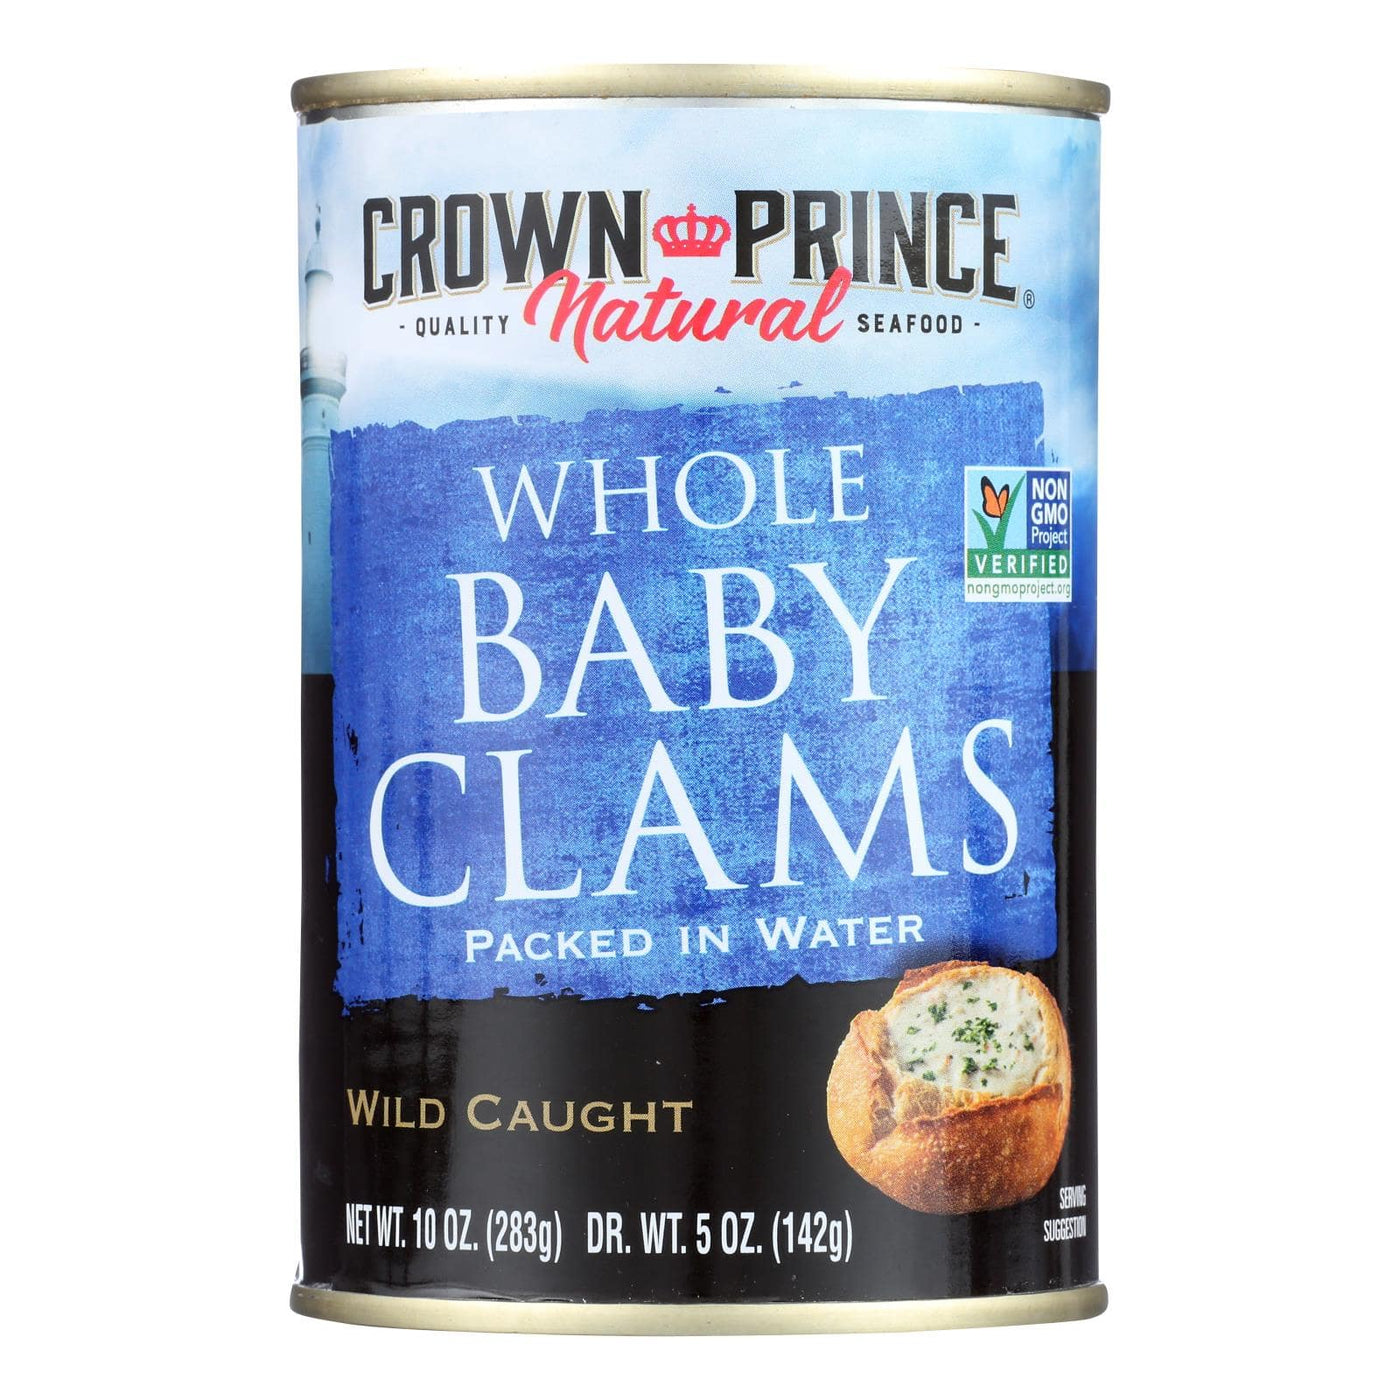 Buy Crown Prince Clams - Boiled Baby Clams In Water - Case Of 12 - 10 Oz.  at OnlyNaturals.us